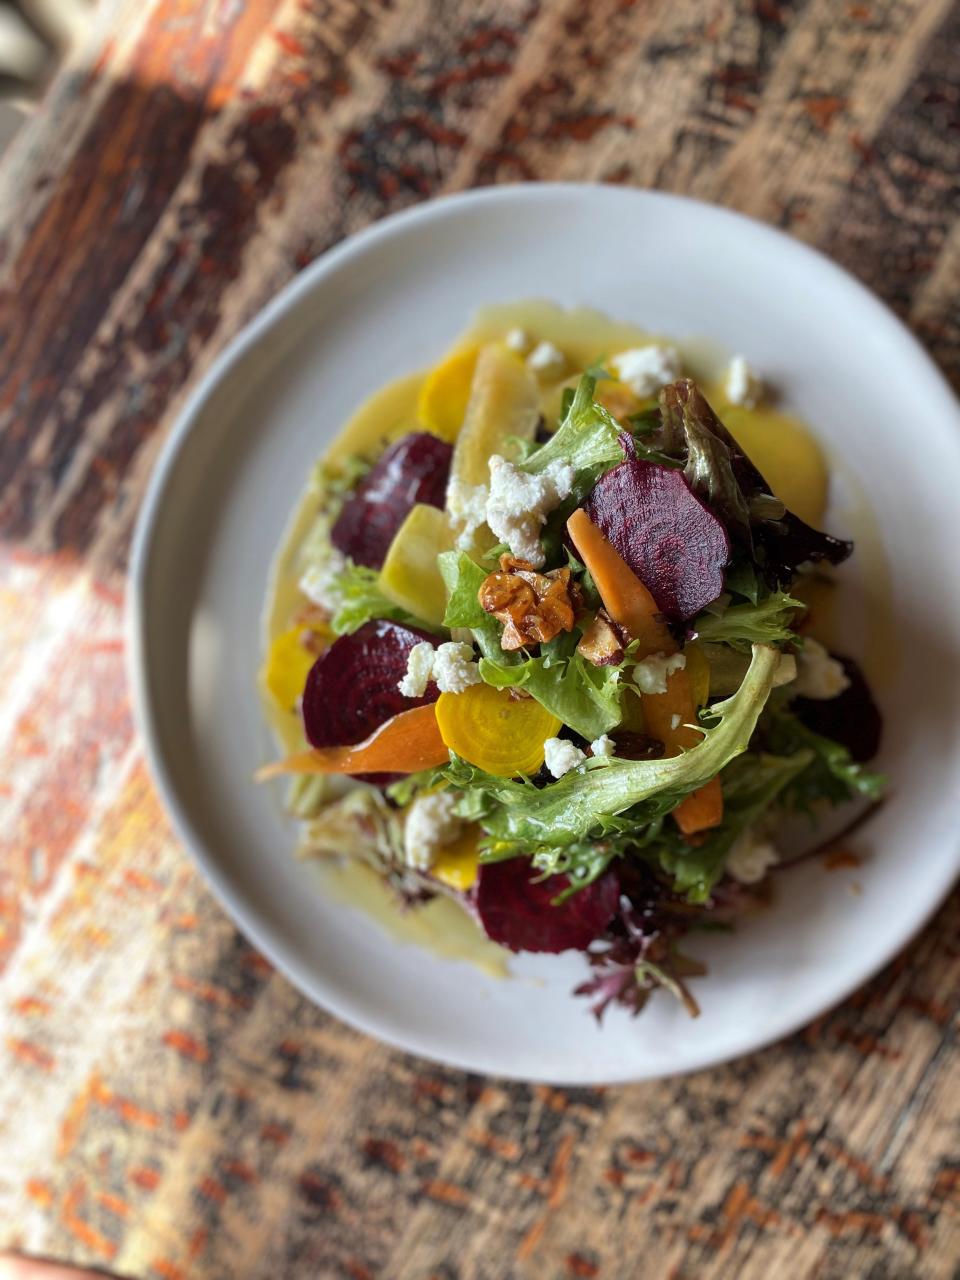 Morristown's South + Pine restaurant's beet and carrot salad, with honey roasted almonds, ginger and goat cheese.